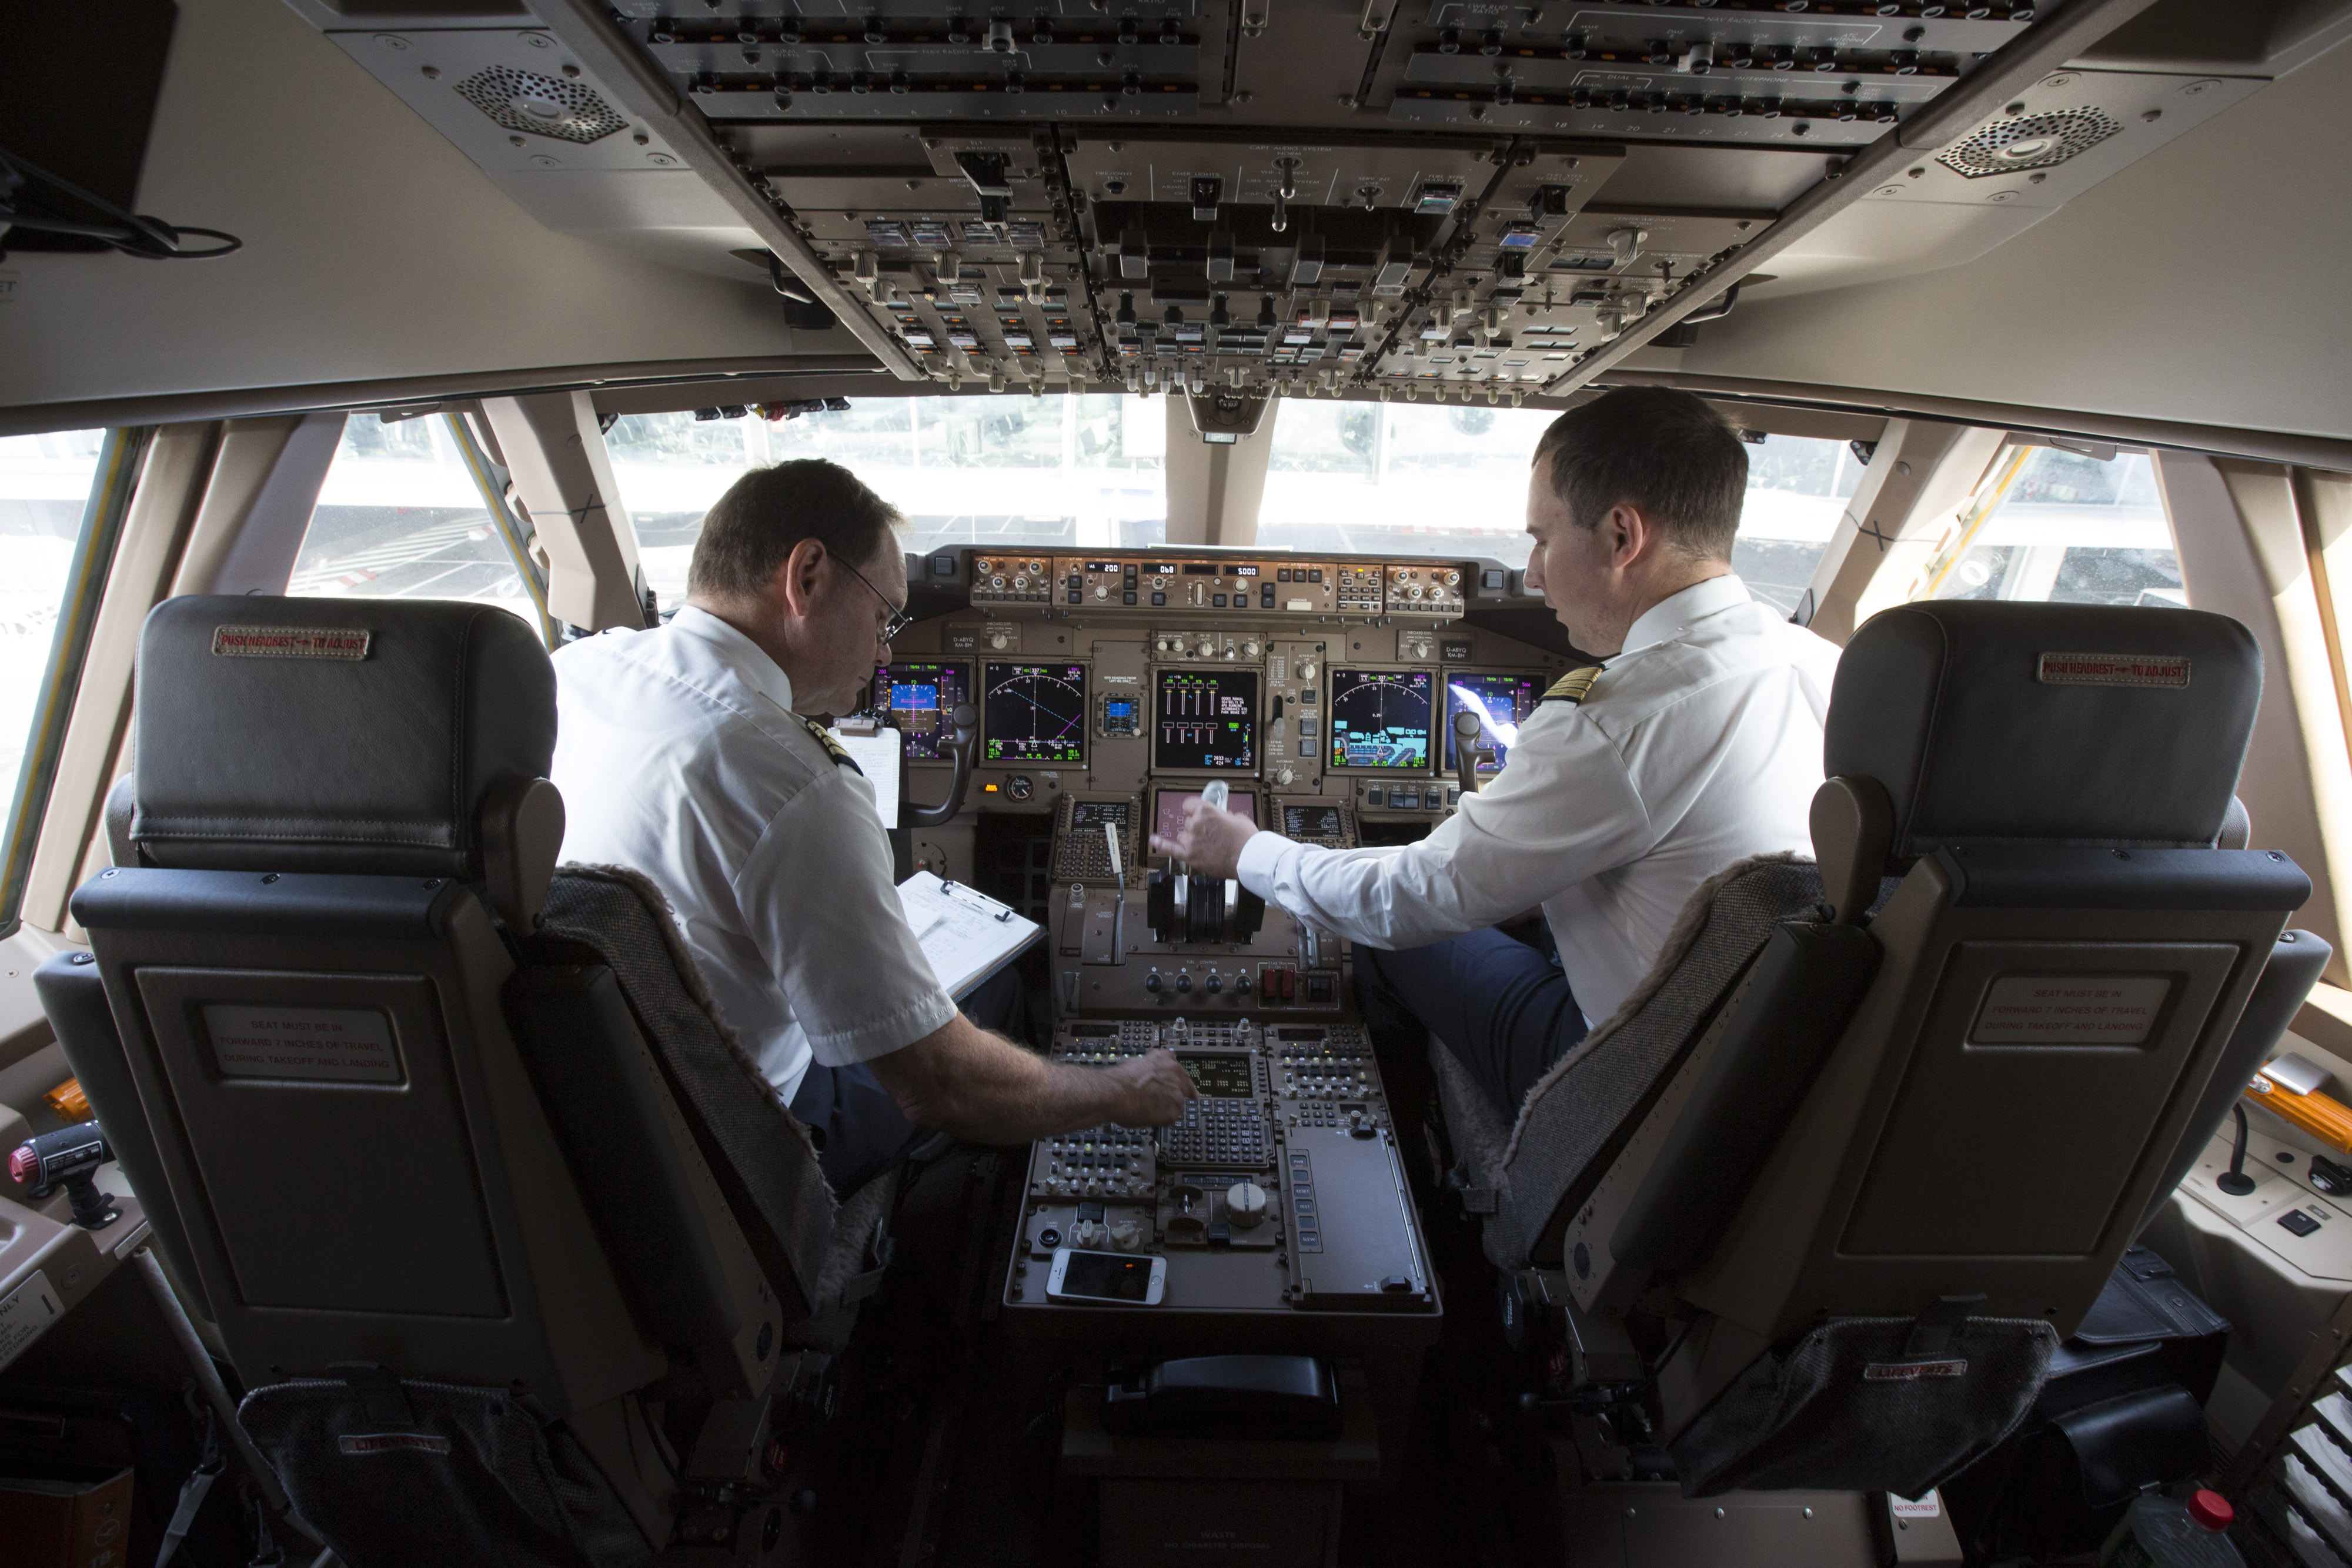 A Deutsche Lufthansa AG pilot, left, and co-pilot sit in the cockpit of a Boeing 747-8 passenger aircraft on Oct. 2, 2014. (Bloomberg via Getty Images)